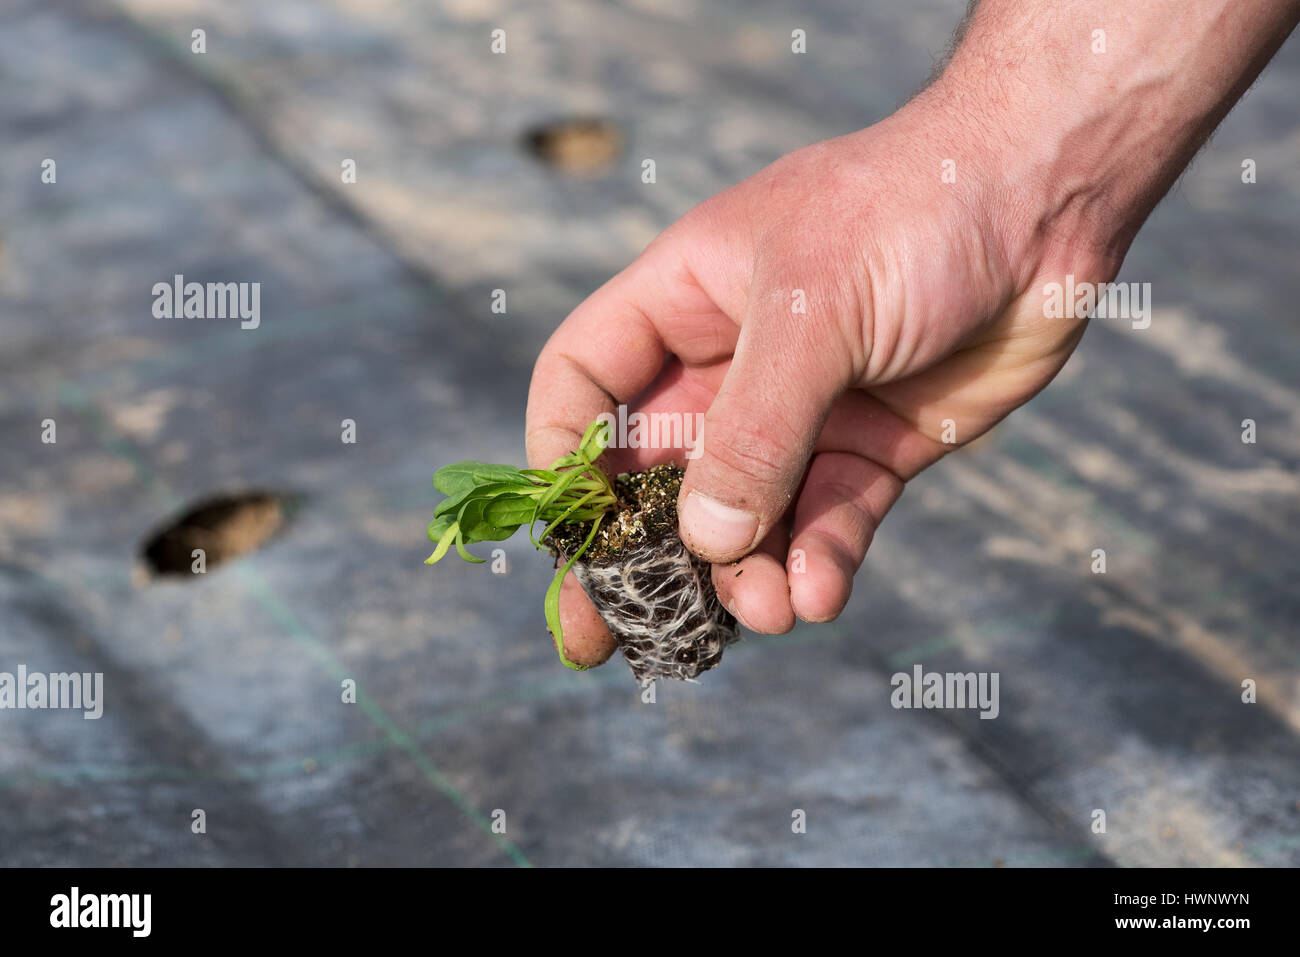 Farmer holding a small seedling of corn salad or Valerianella locusta, ready for transplanting in his hand showing the compacted roots and green shoot Stock Photo